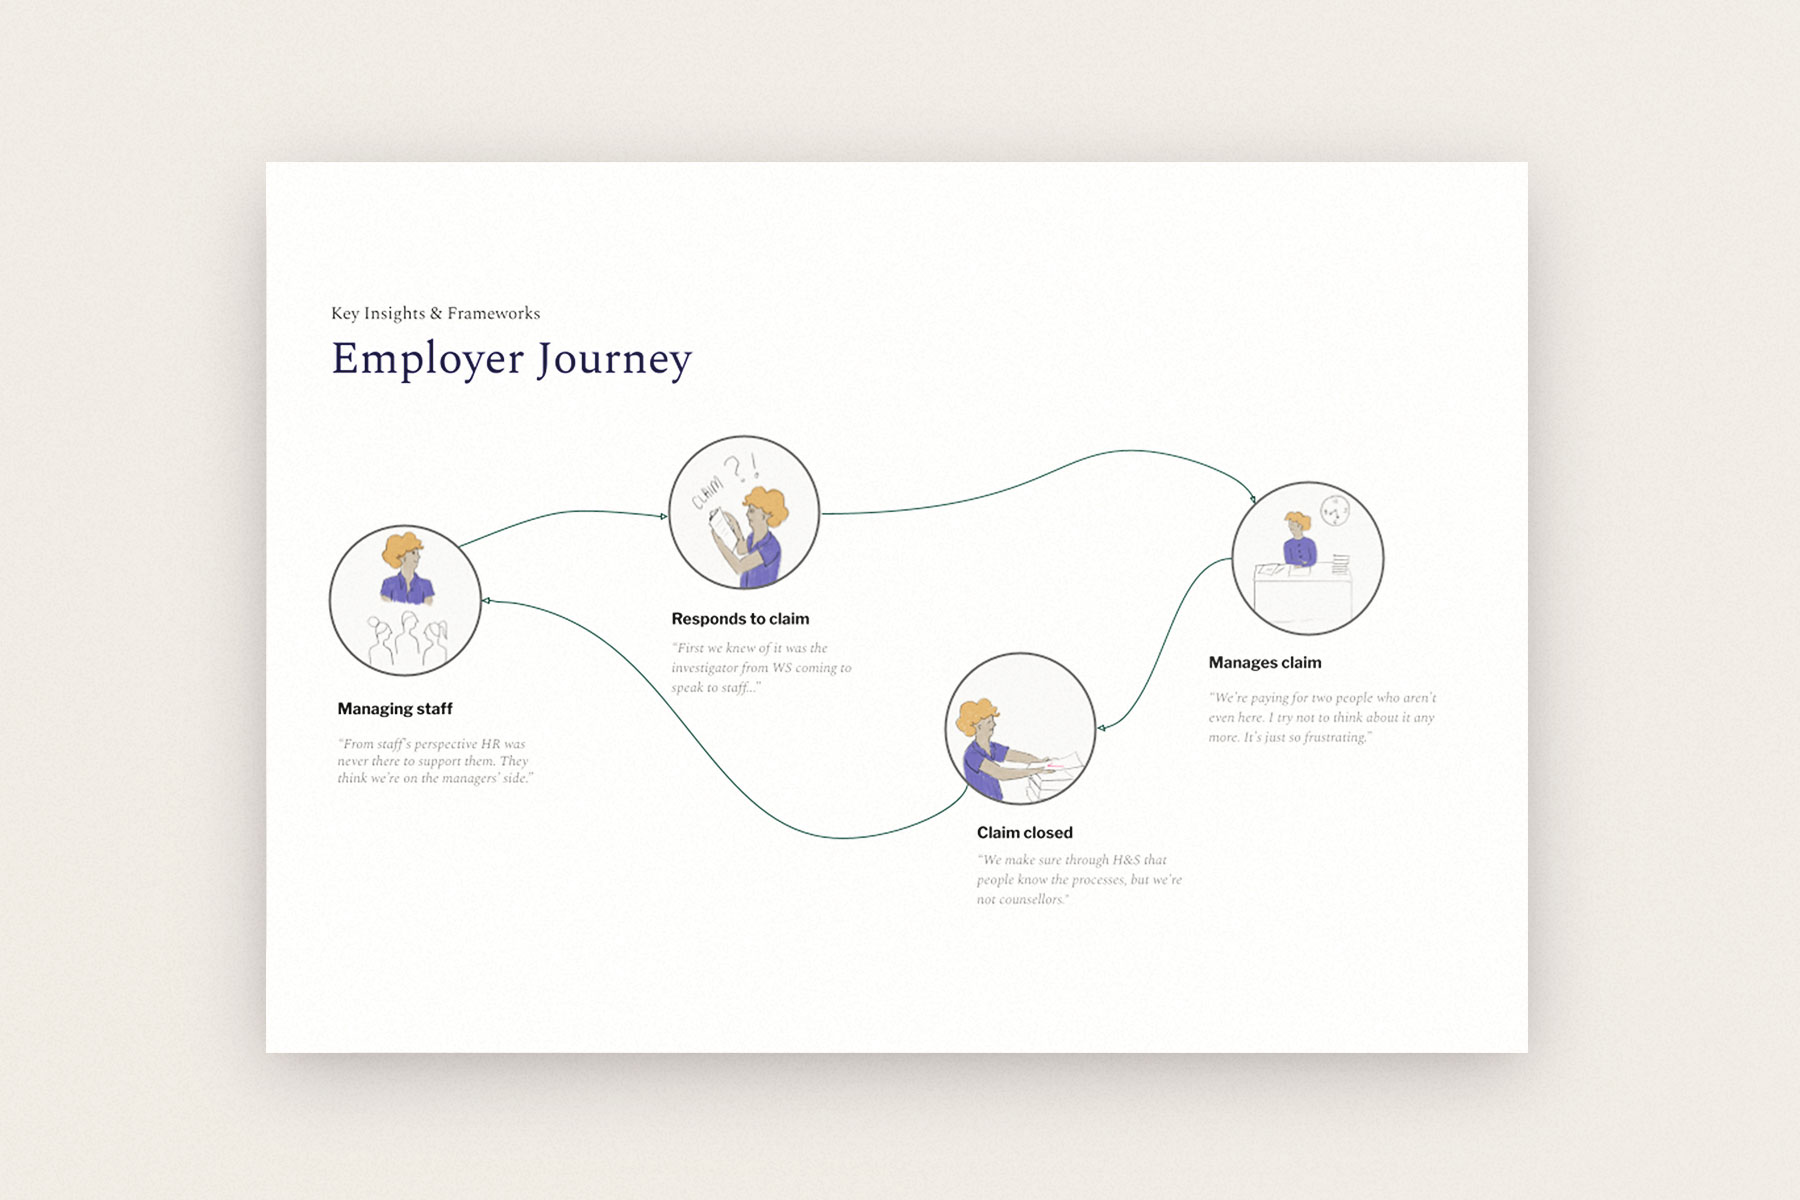 An illustration showing the employer journey which is a loop made up of 4 steps. Managing staff, responding to claims, managing claims and closing claims.